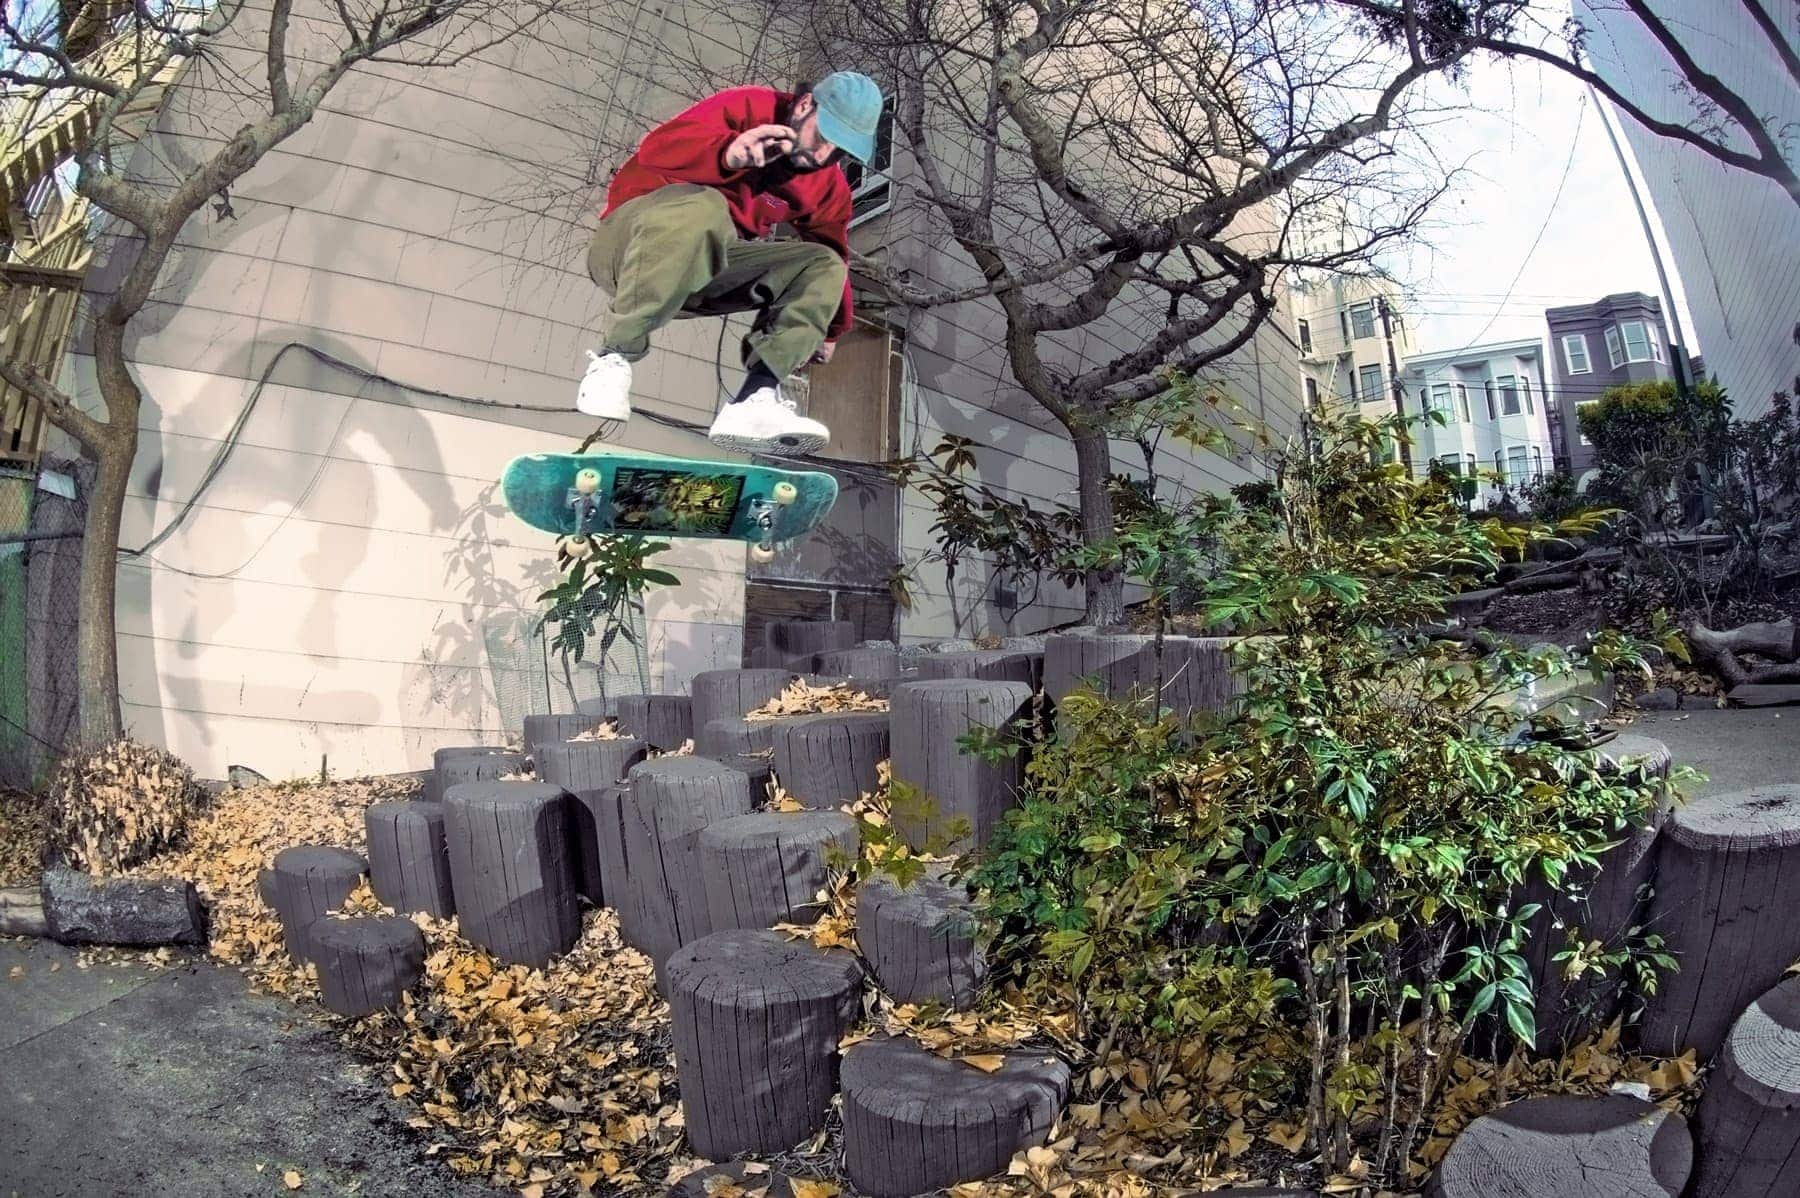 DJ Rosa switch heel over a gap in San Francisco for Skate Jawn Magazine interview.